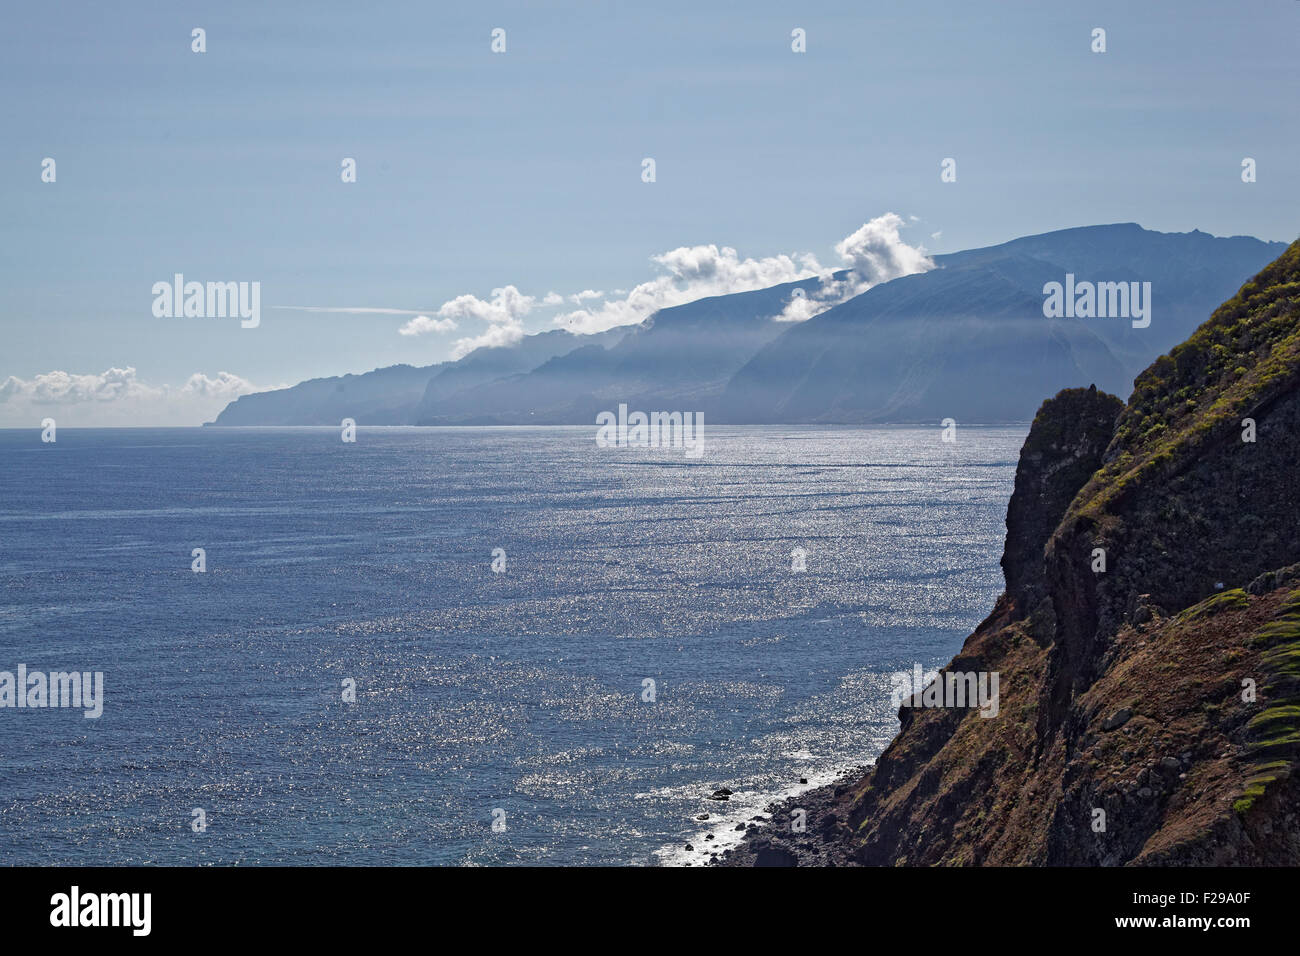 Back-lit - contre jour - ocean scene with clouds and mist rising from mountain tops, near Seixal, Madeira, Portugal Stock Photo